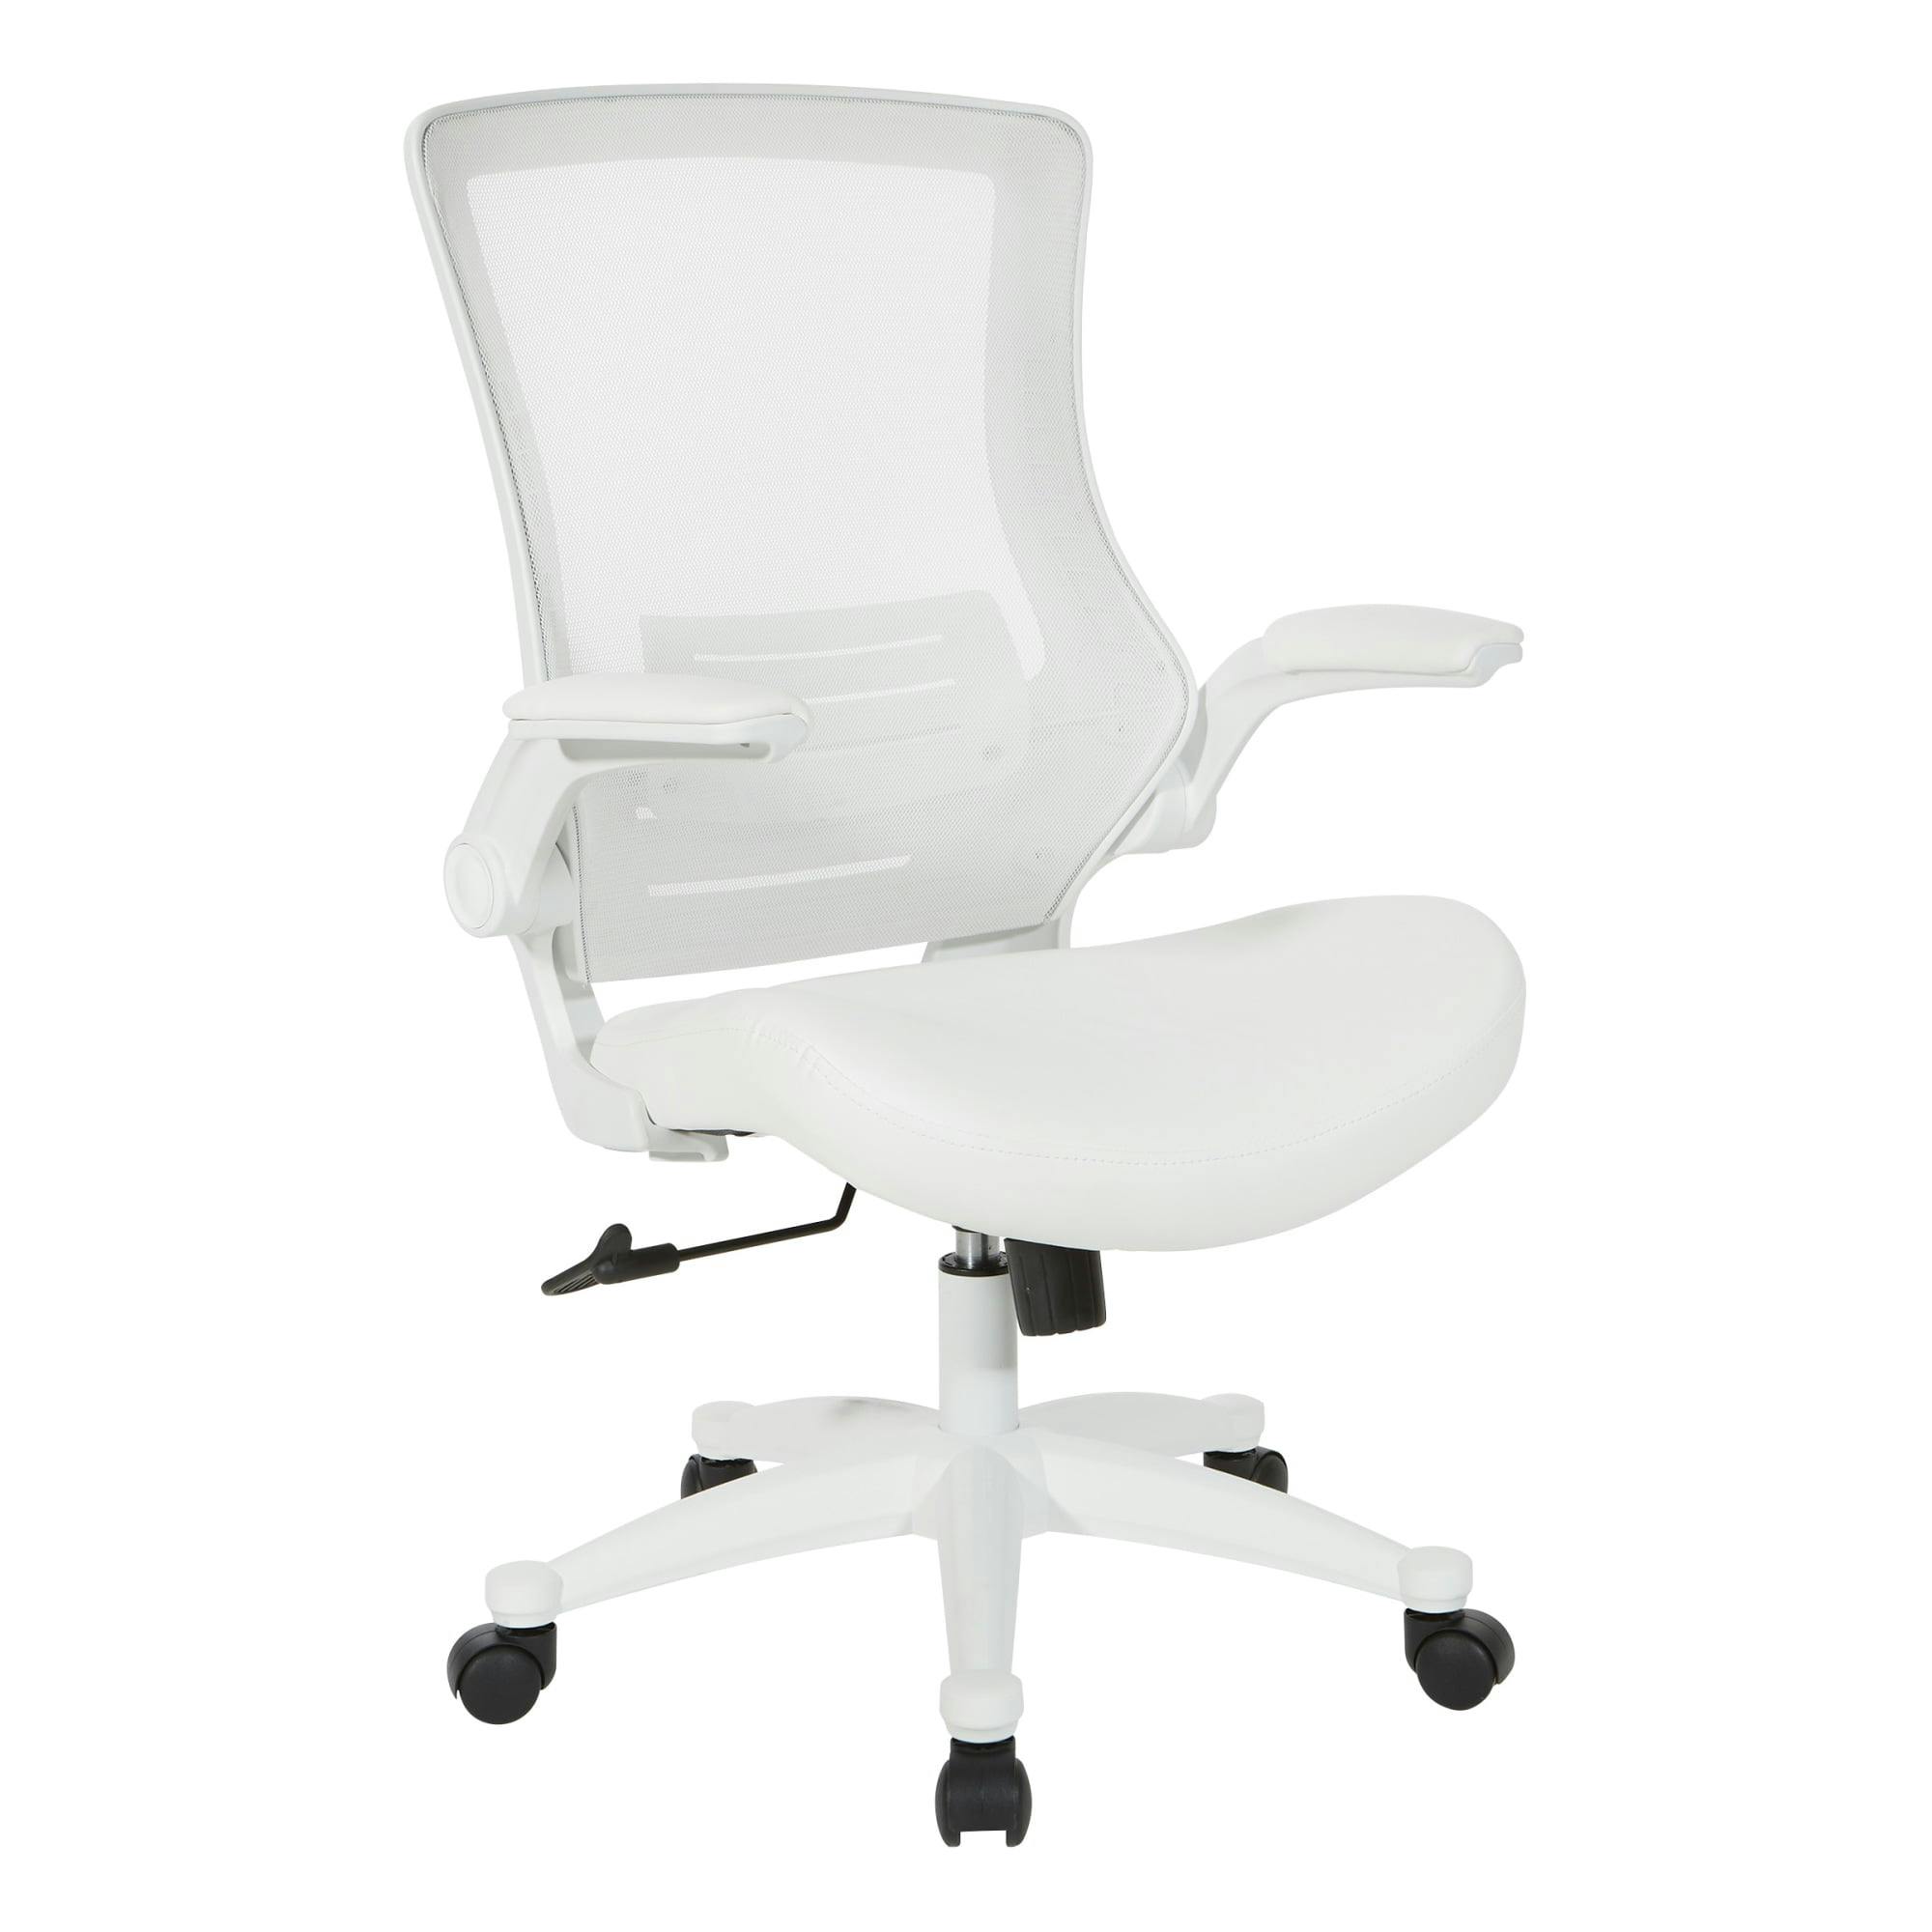 Elegant White Faux Leather Executive Swivel Chair with Adjustable Arms